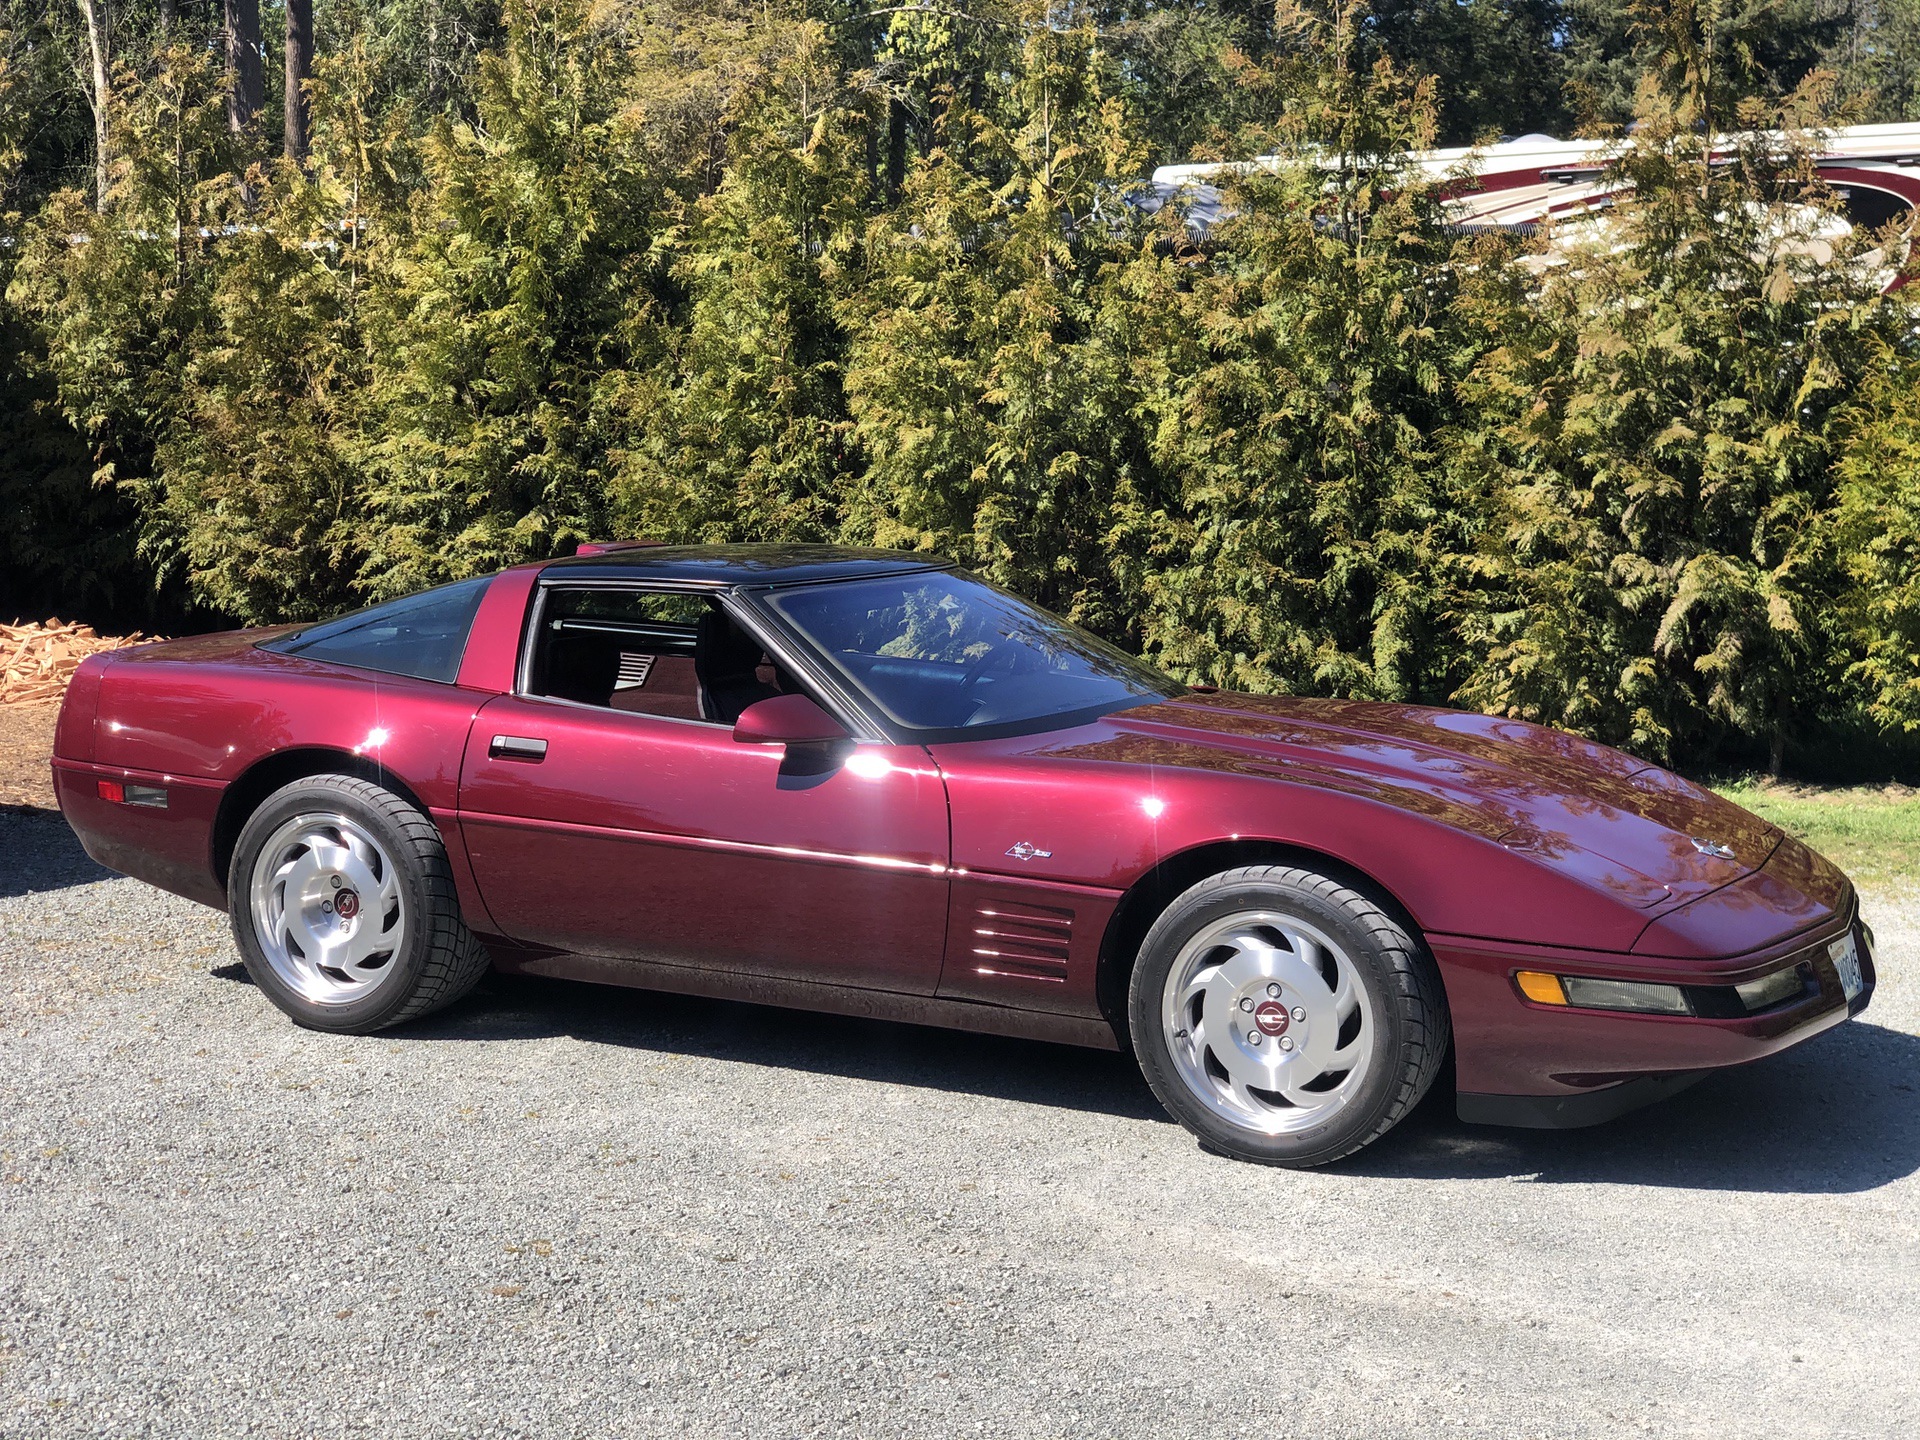 Red 1993 Corvette C4 ZR-1 40th Anniversary Edition parked on street